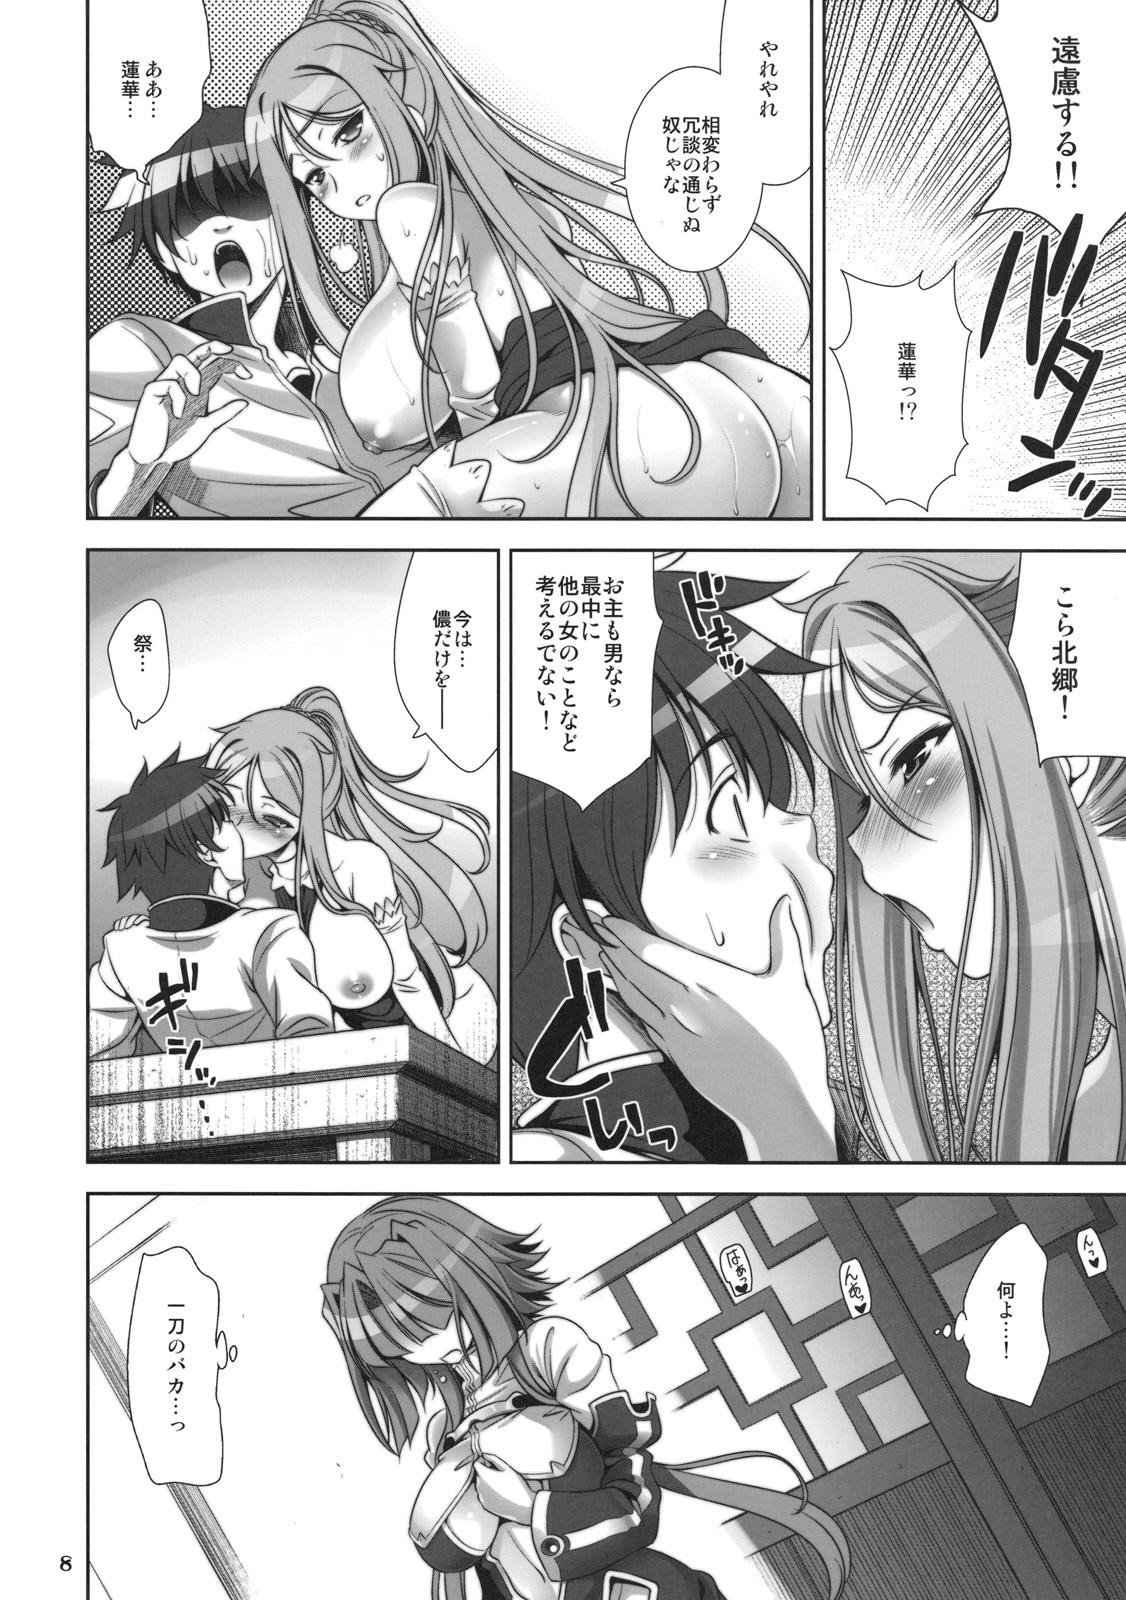 Celebrity Sex Go! My Way - Koihime musou Goldenshower - Page 7